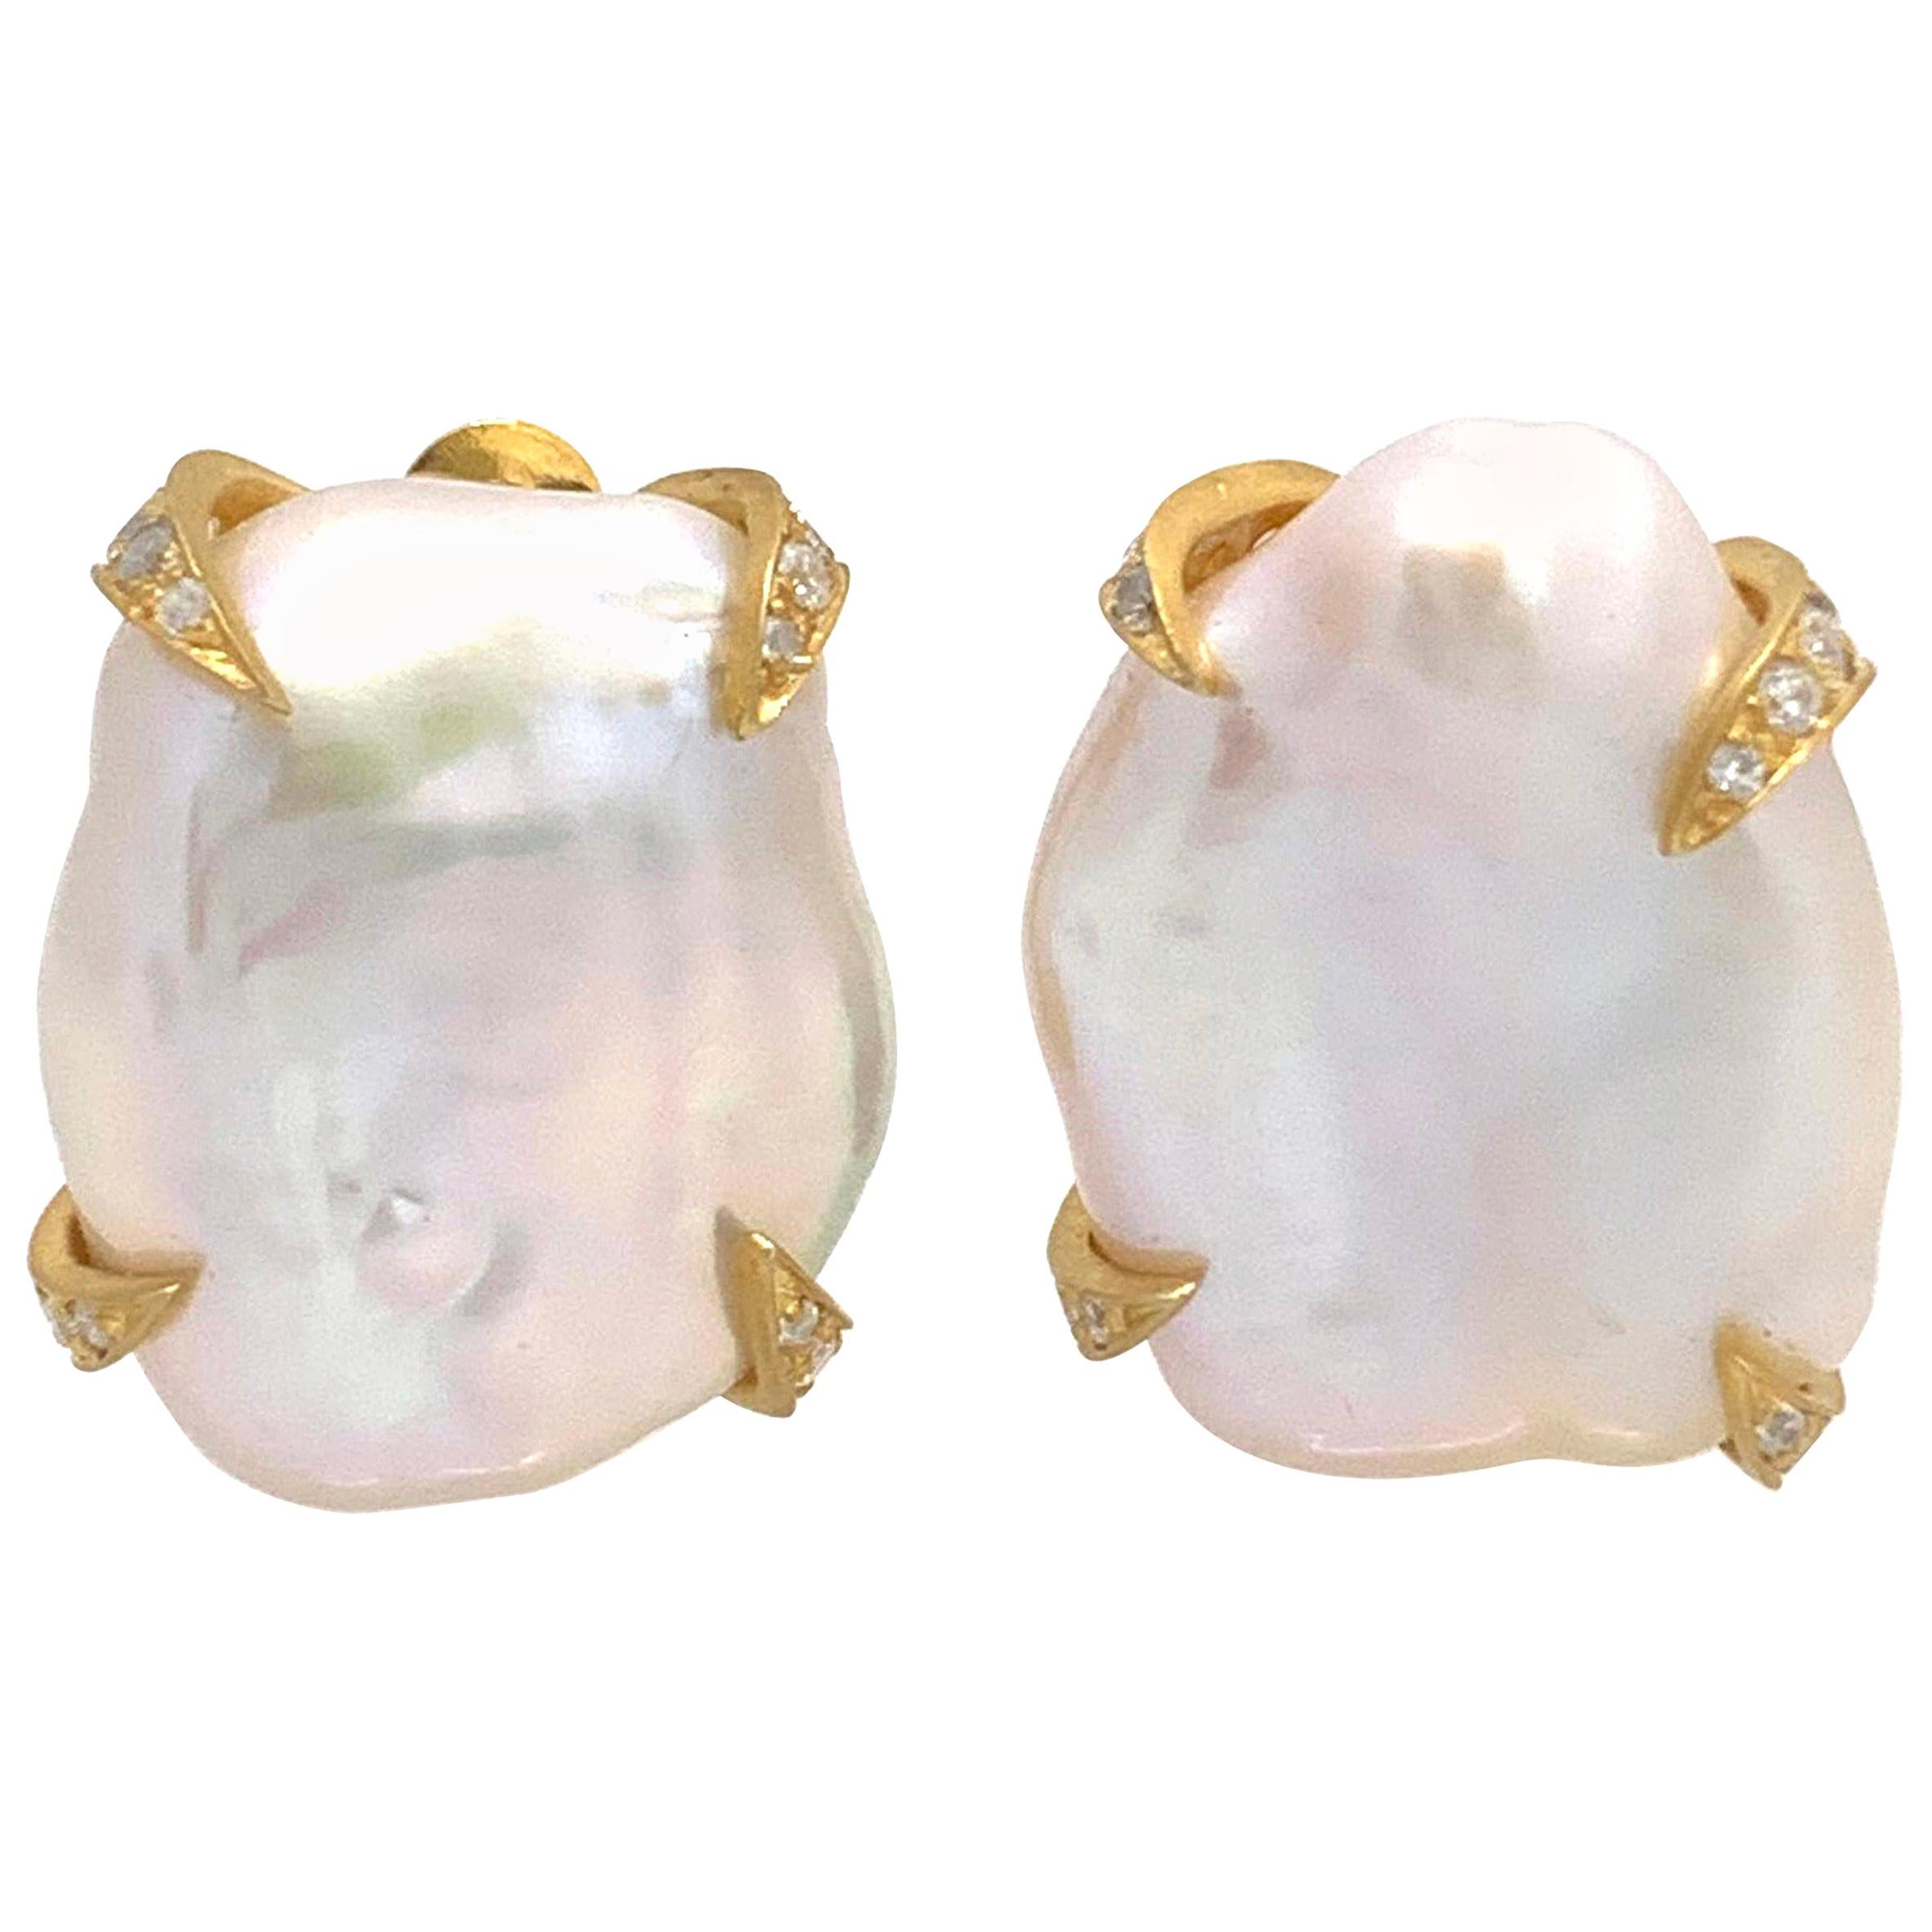 Large Lustrous Pair of 18mm White Baroque Pearl Earrings